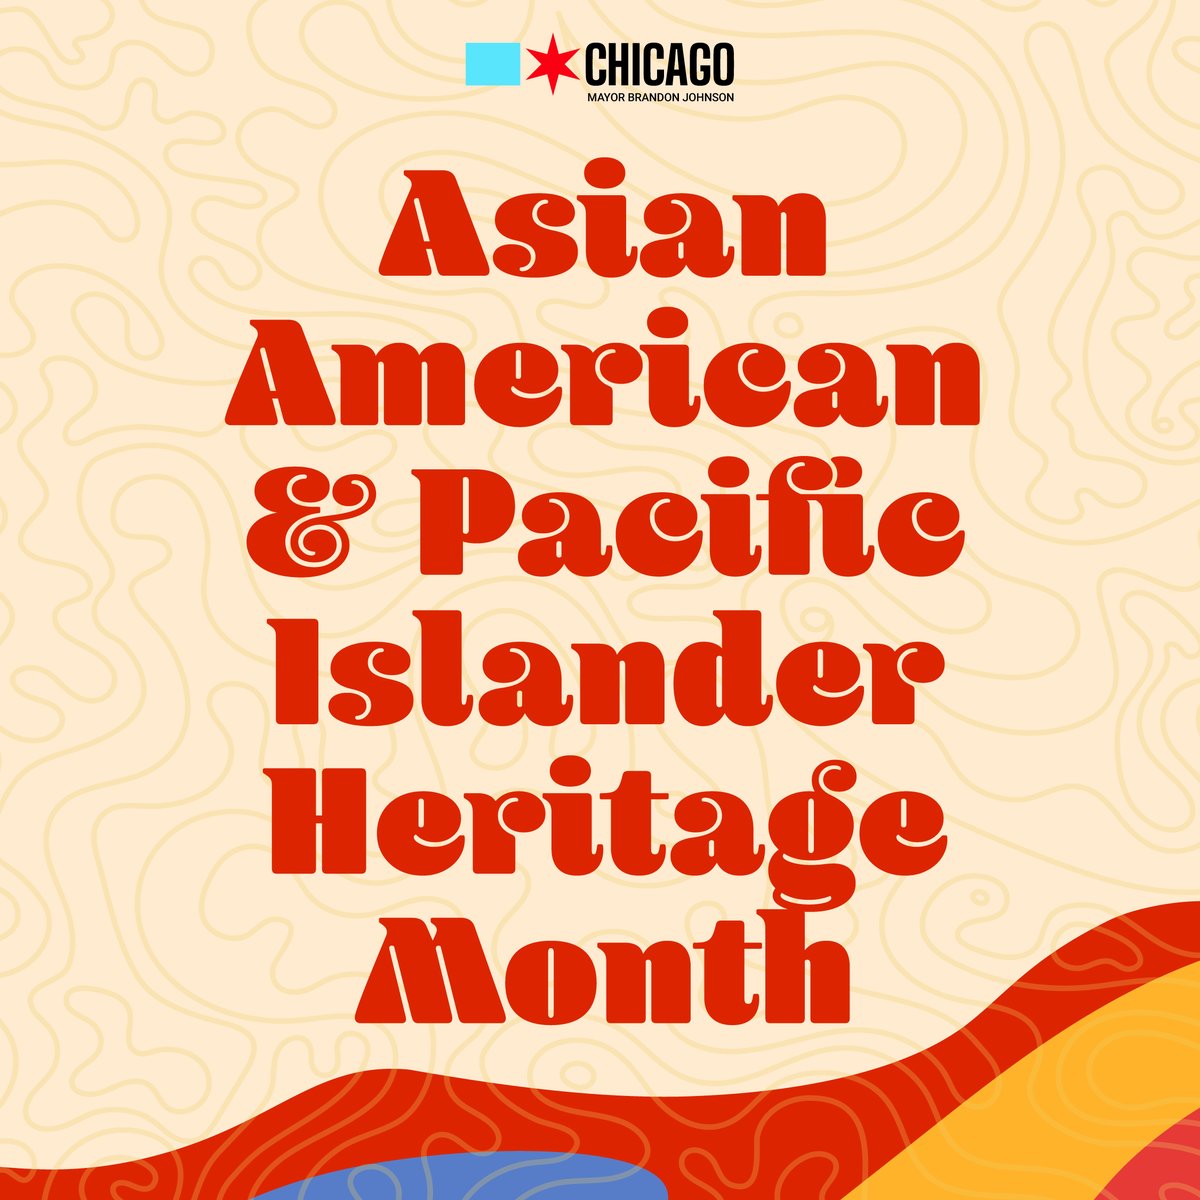 Extending love to our AAPI communities as Chicago recognizes Asian American & Pacific Islander Heritage Month!